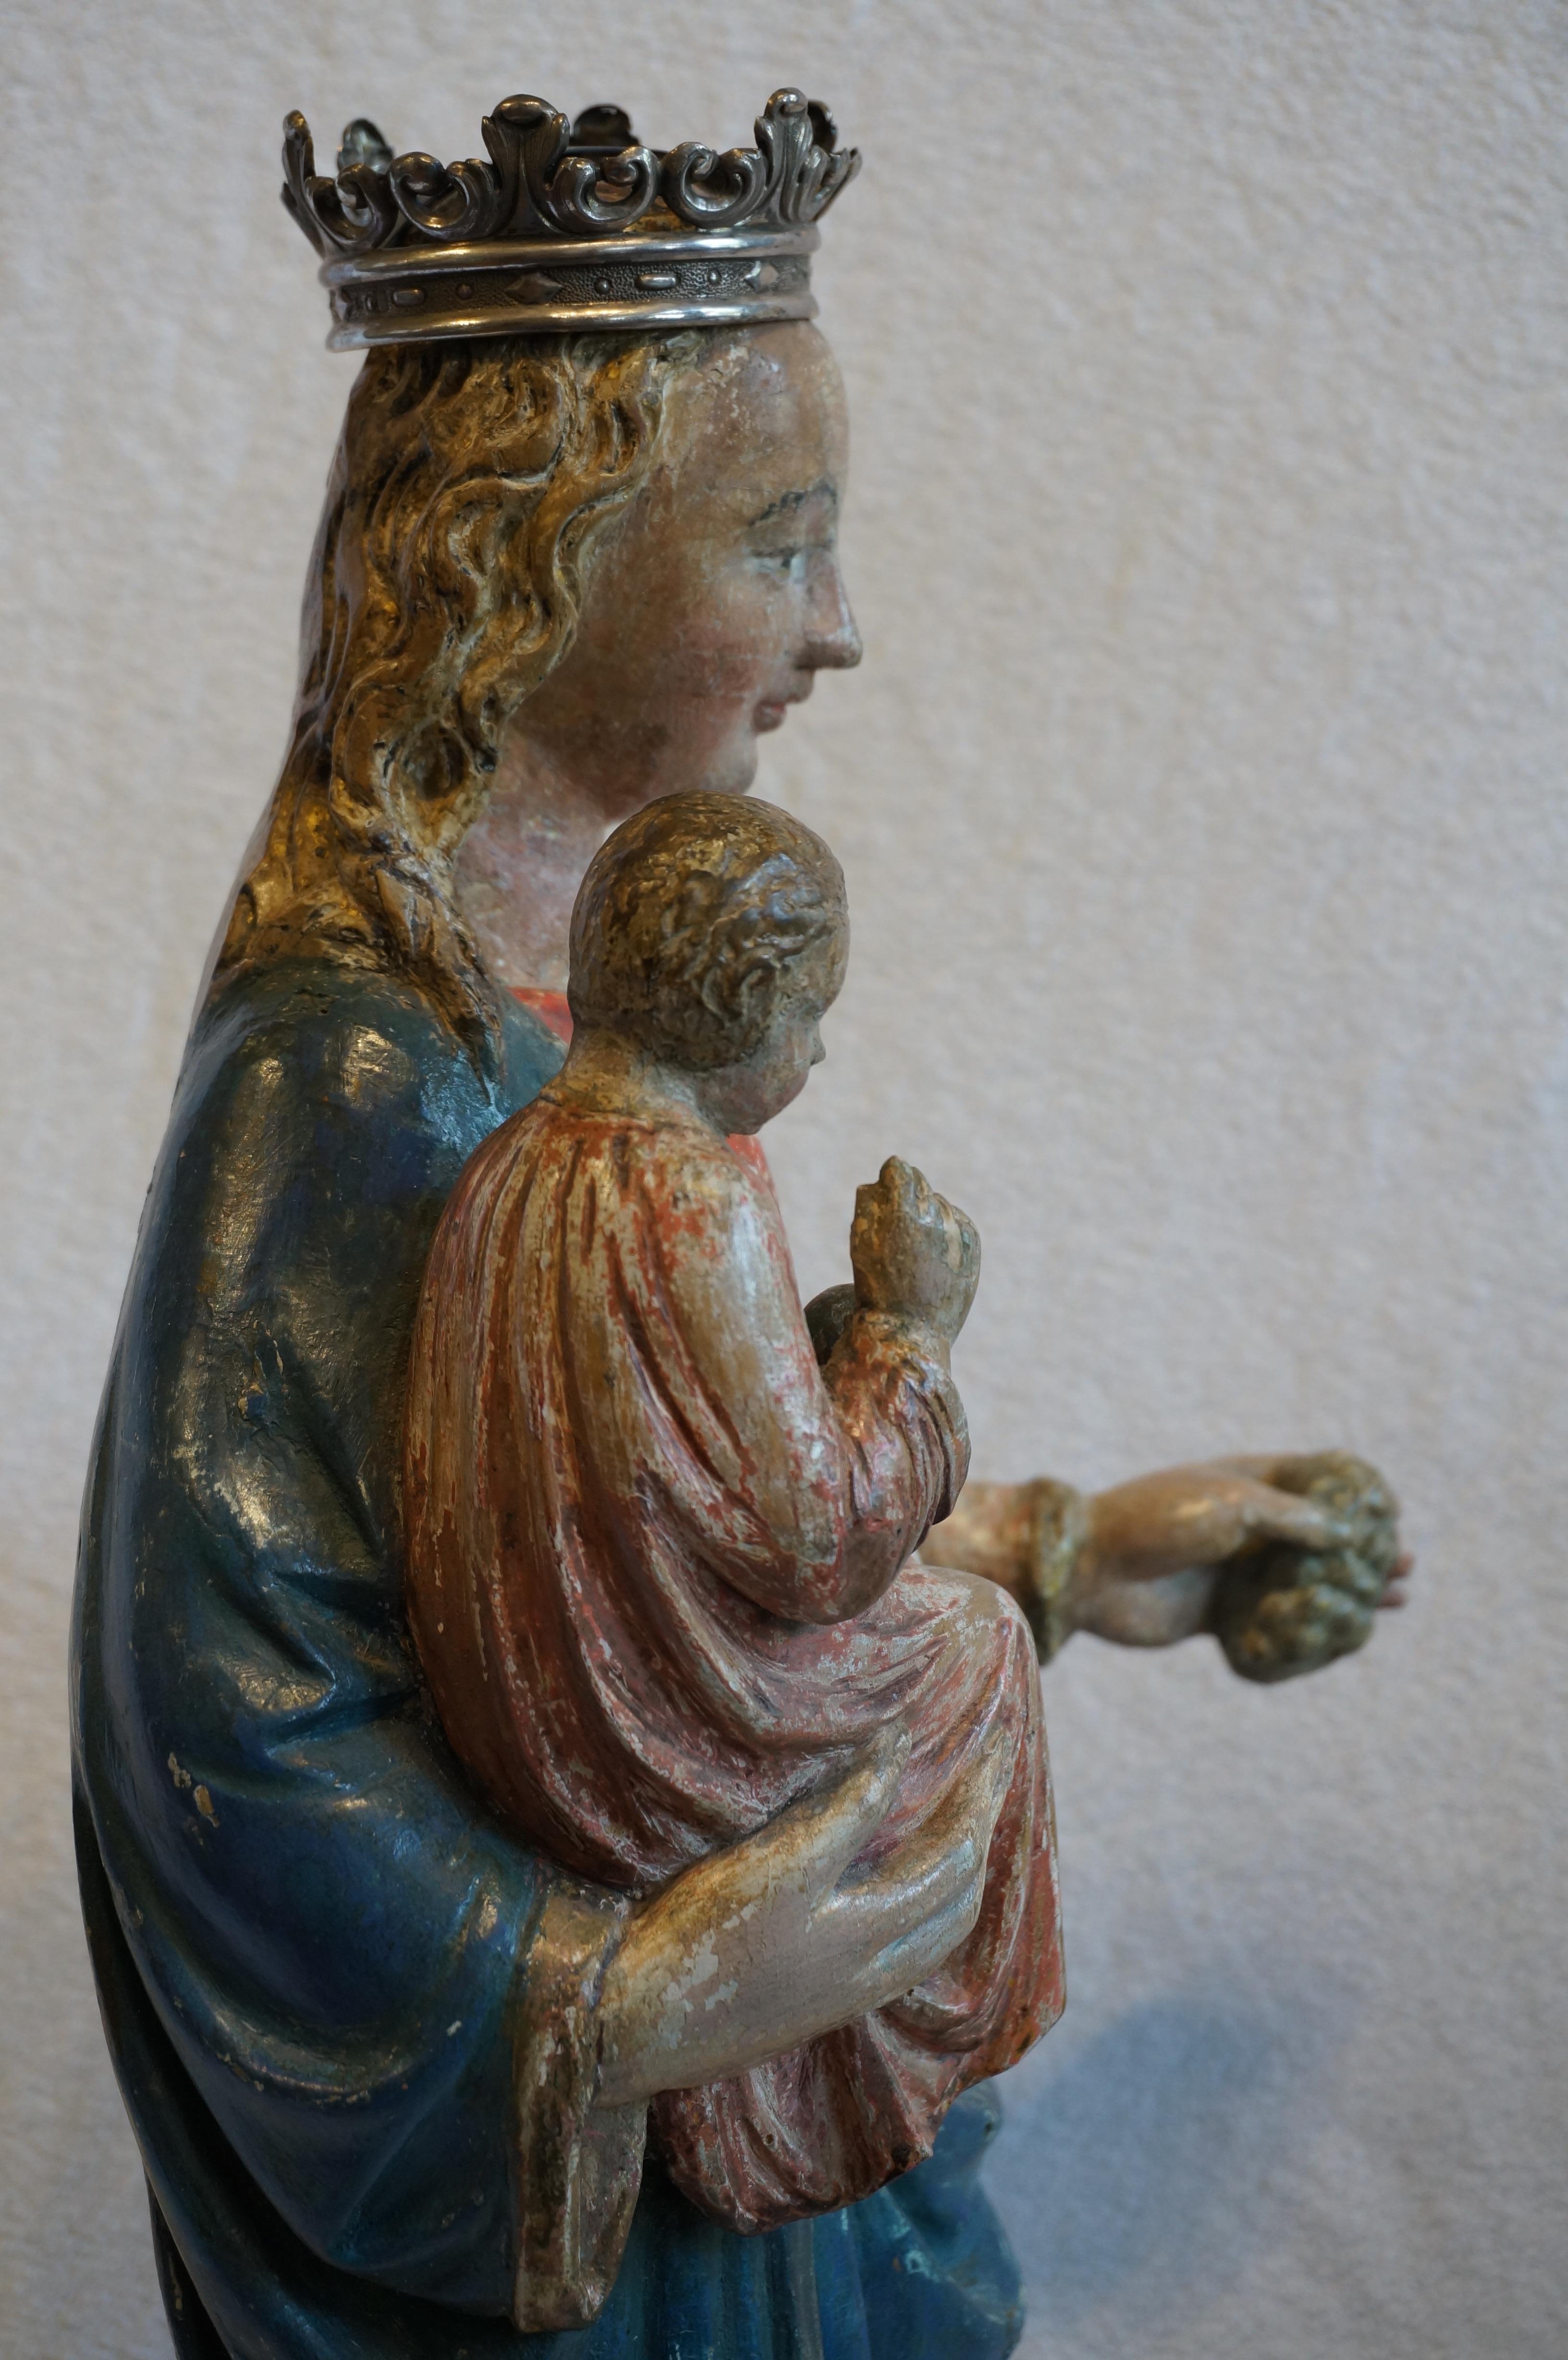 Antique Sculpture of Mary with the Child Jesus, Belgium, early 17th century For Sale 3